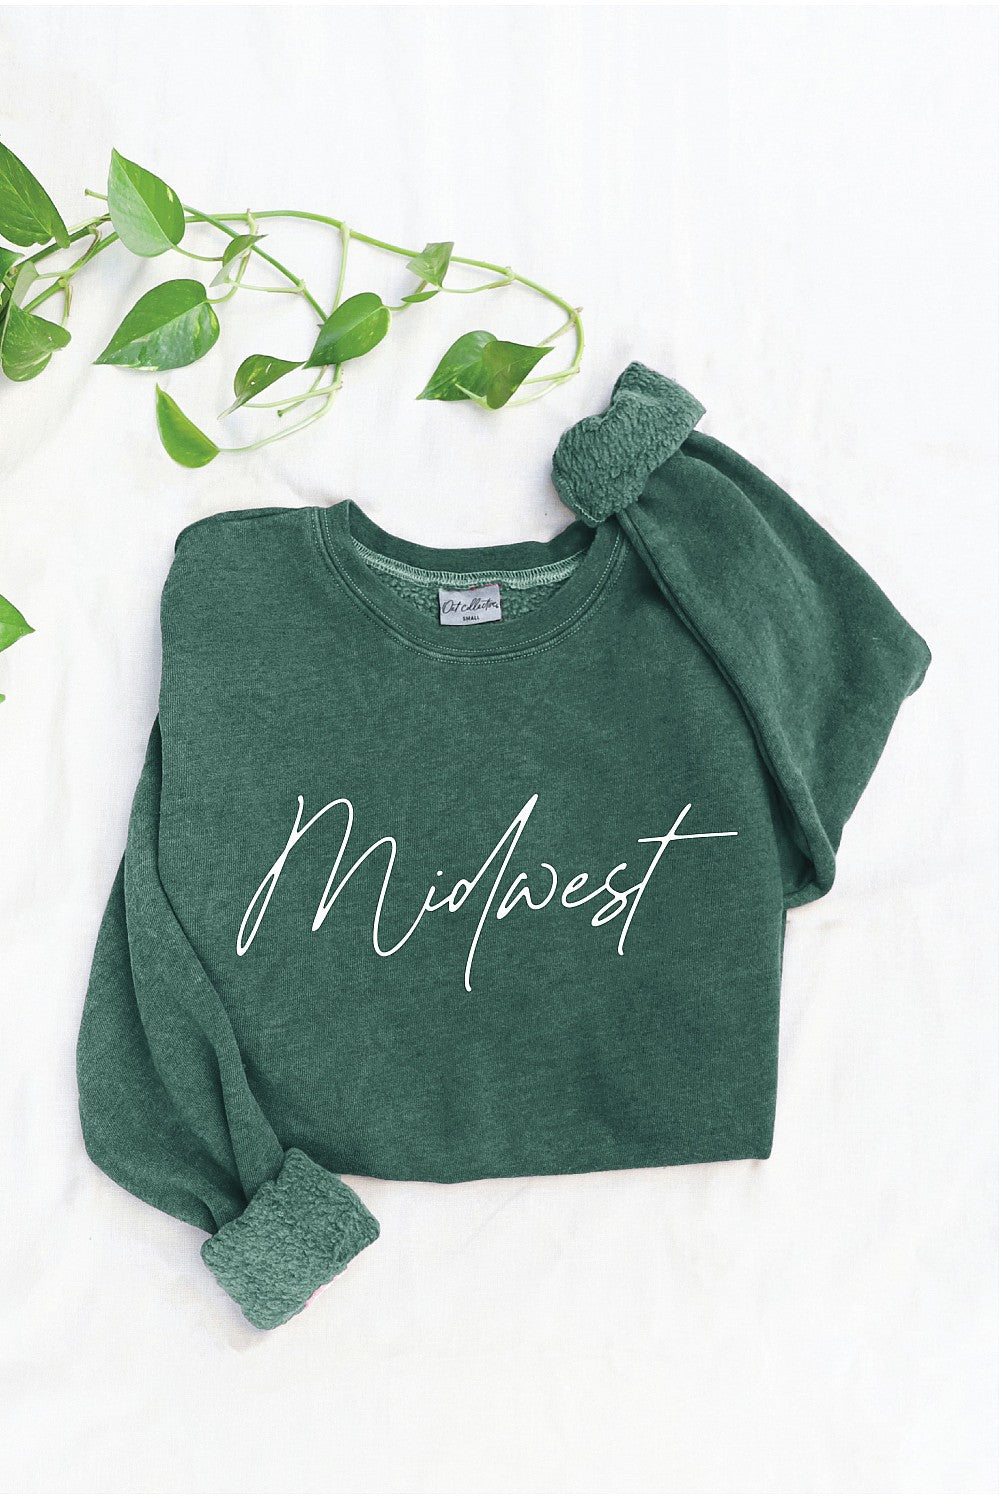 Midwest mineral graphic sweatshirt- Forest Green